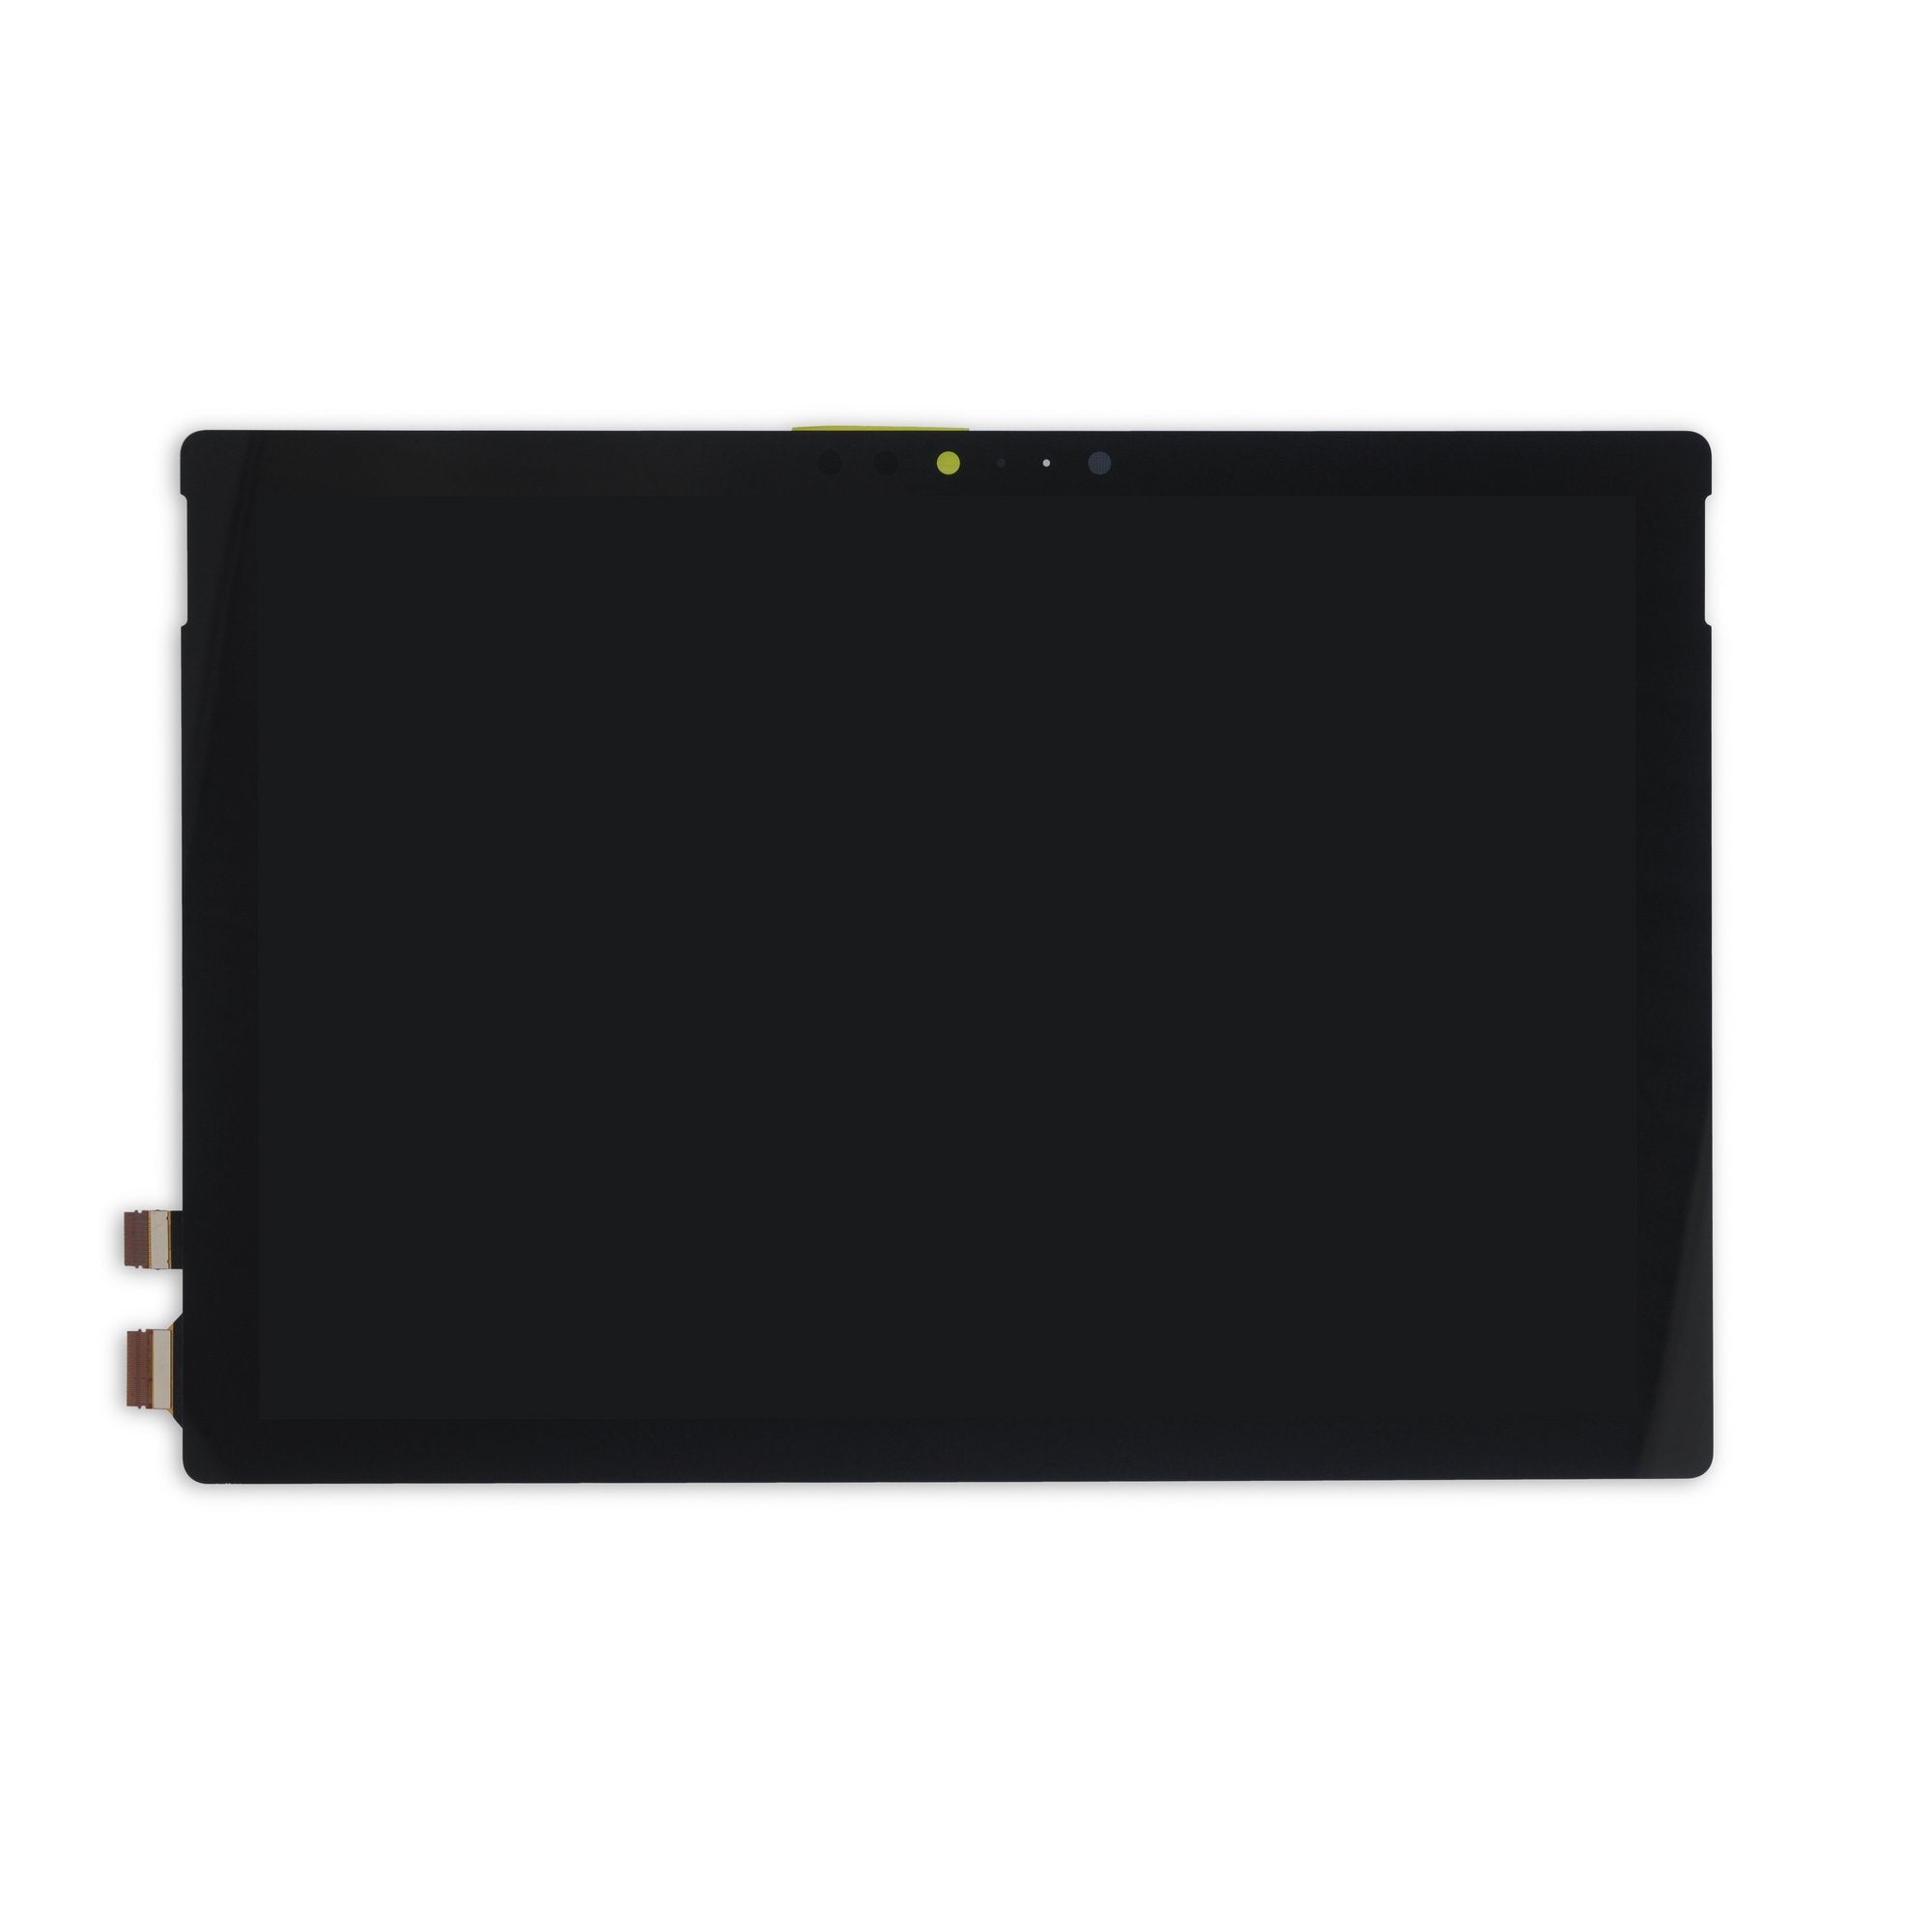 Surface Pro 5 Screen Replacement Service